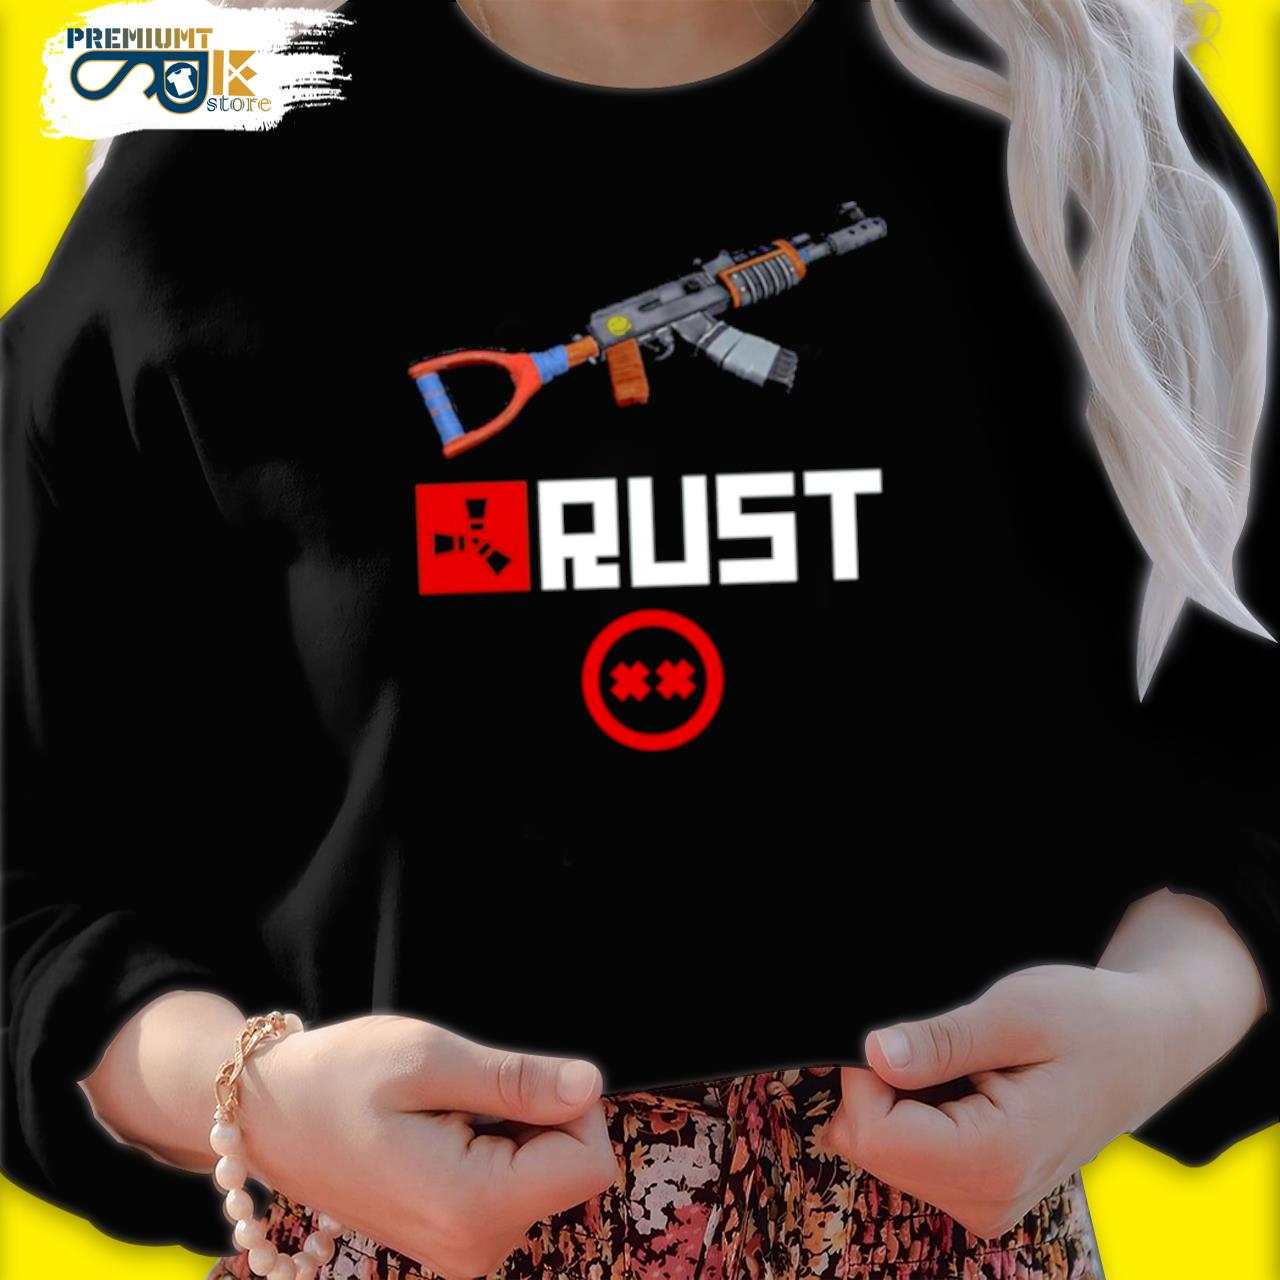 The-Gun-Rust-Console-Edition-Game-s black sweater